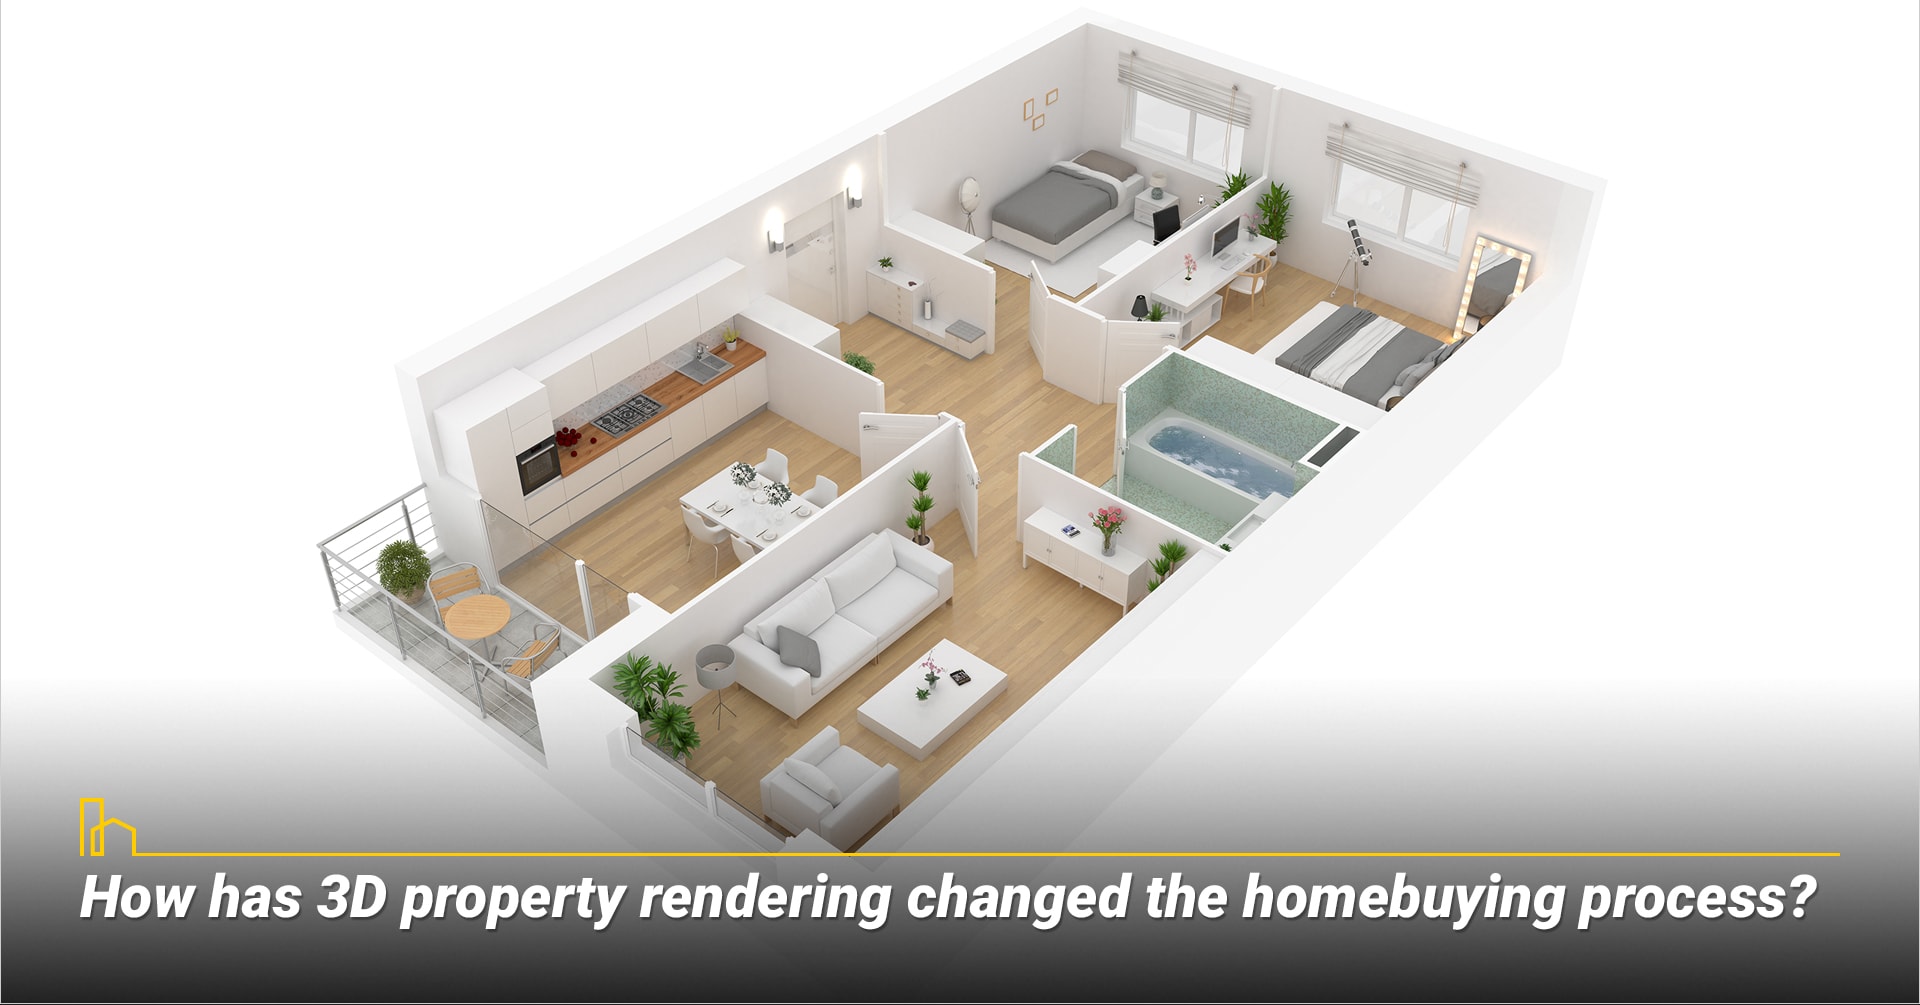 How has 3D property rendering changed the homebuying process? 